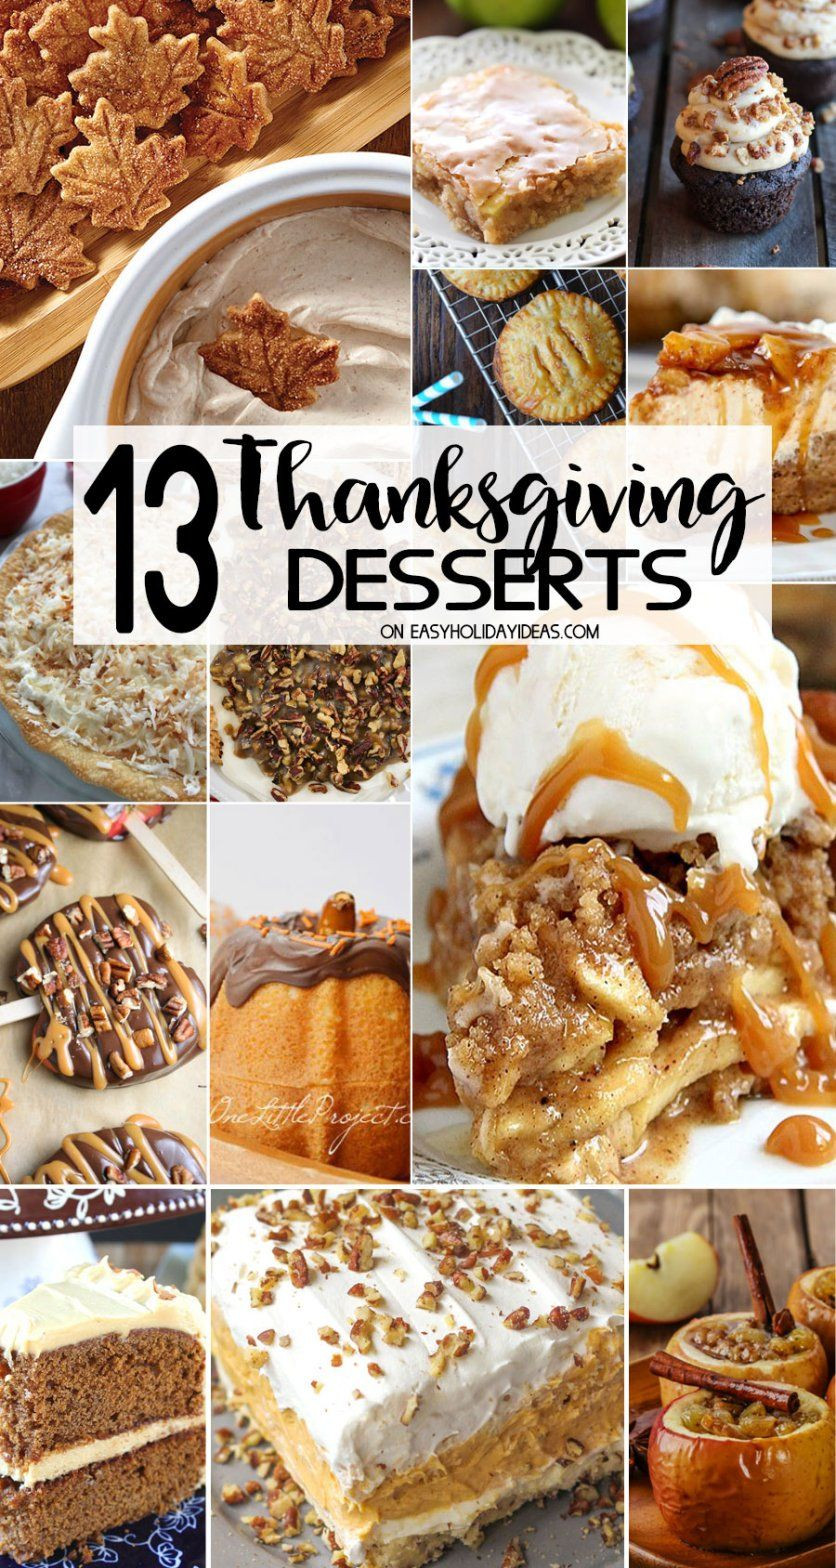 Thanksgiving Pies List
 Best Thanksgiving Desserts to please everyone on your